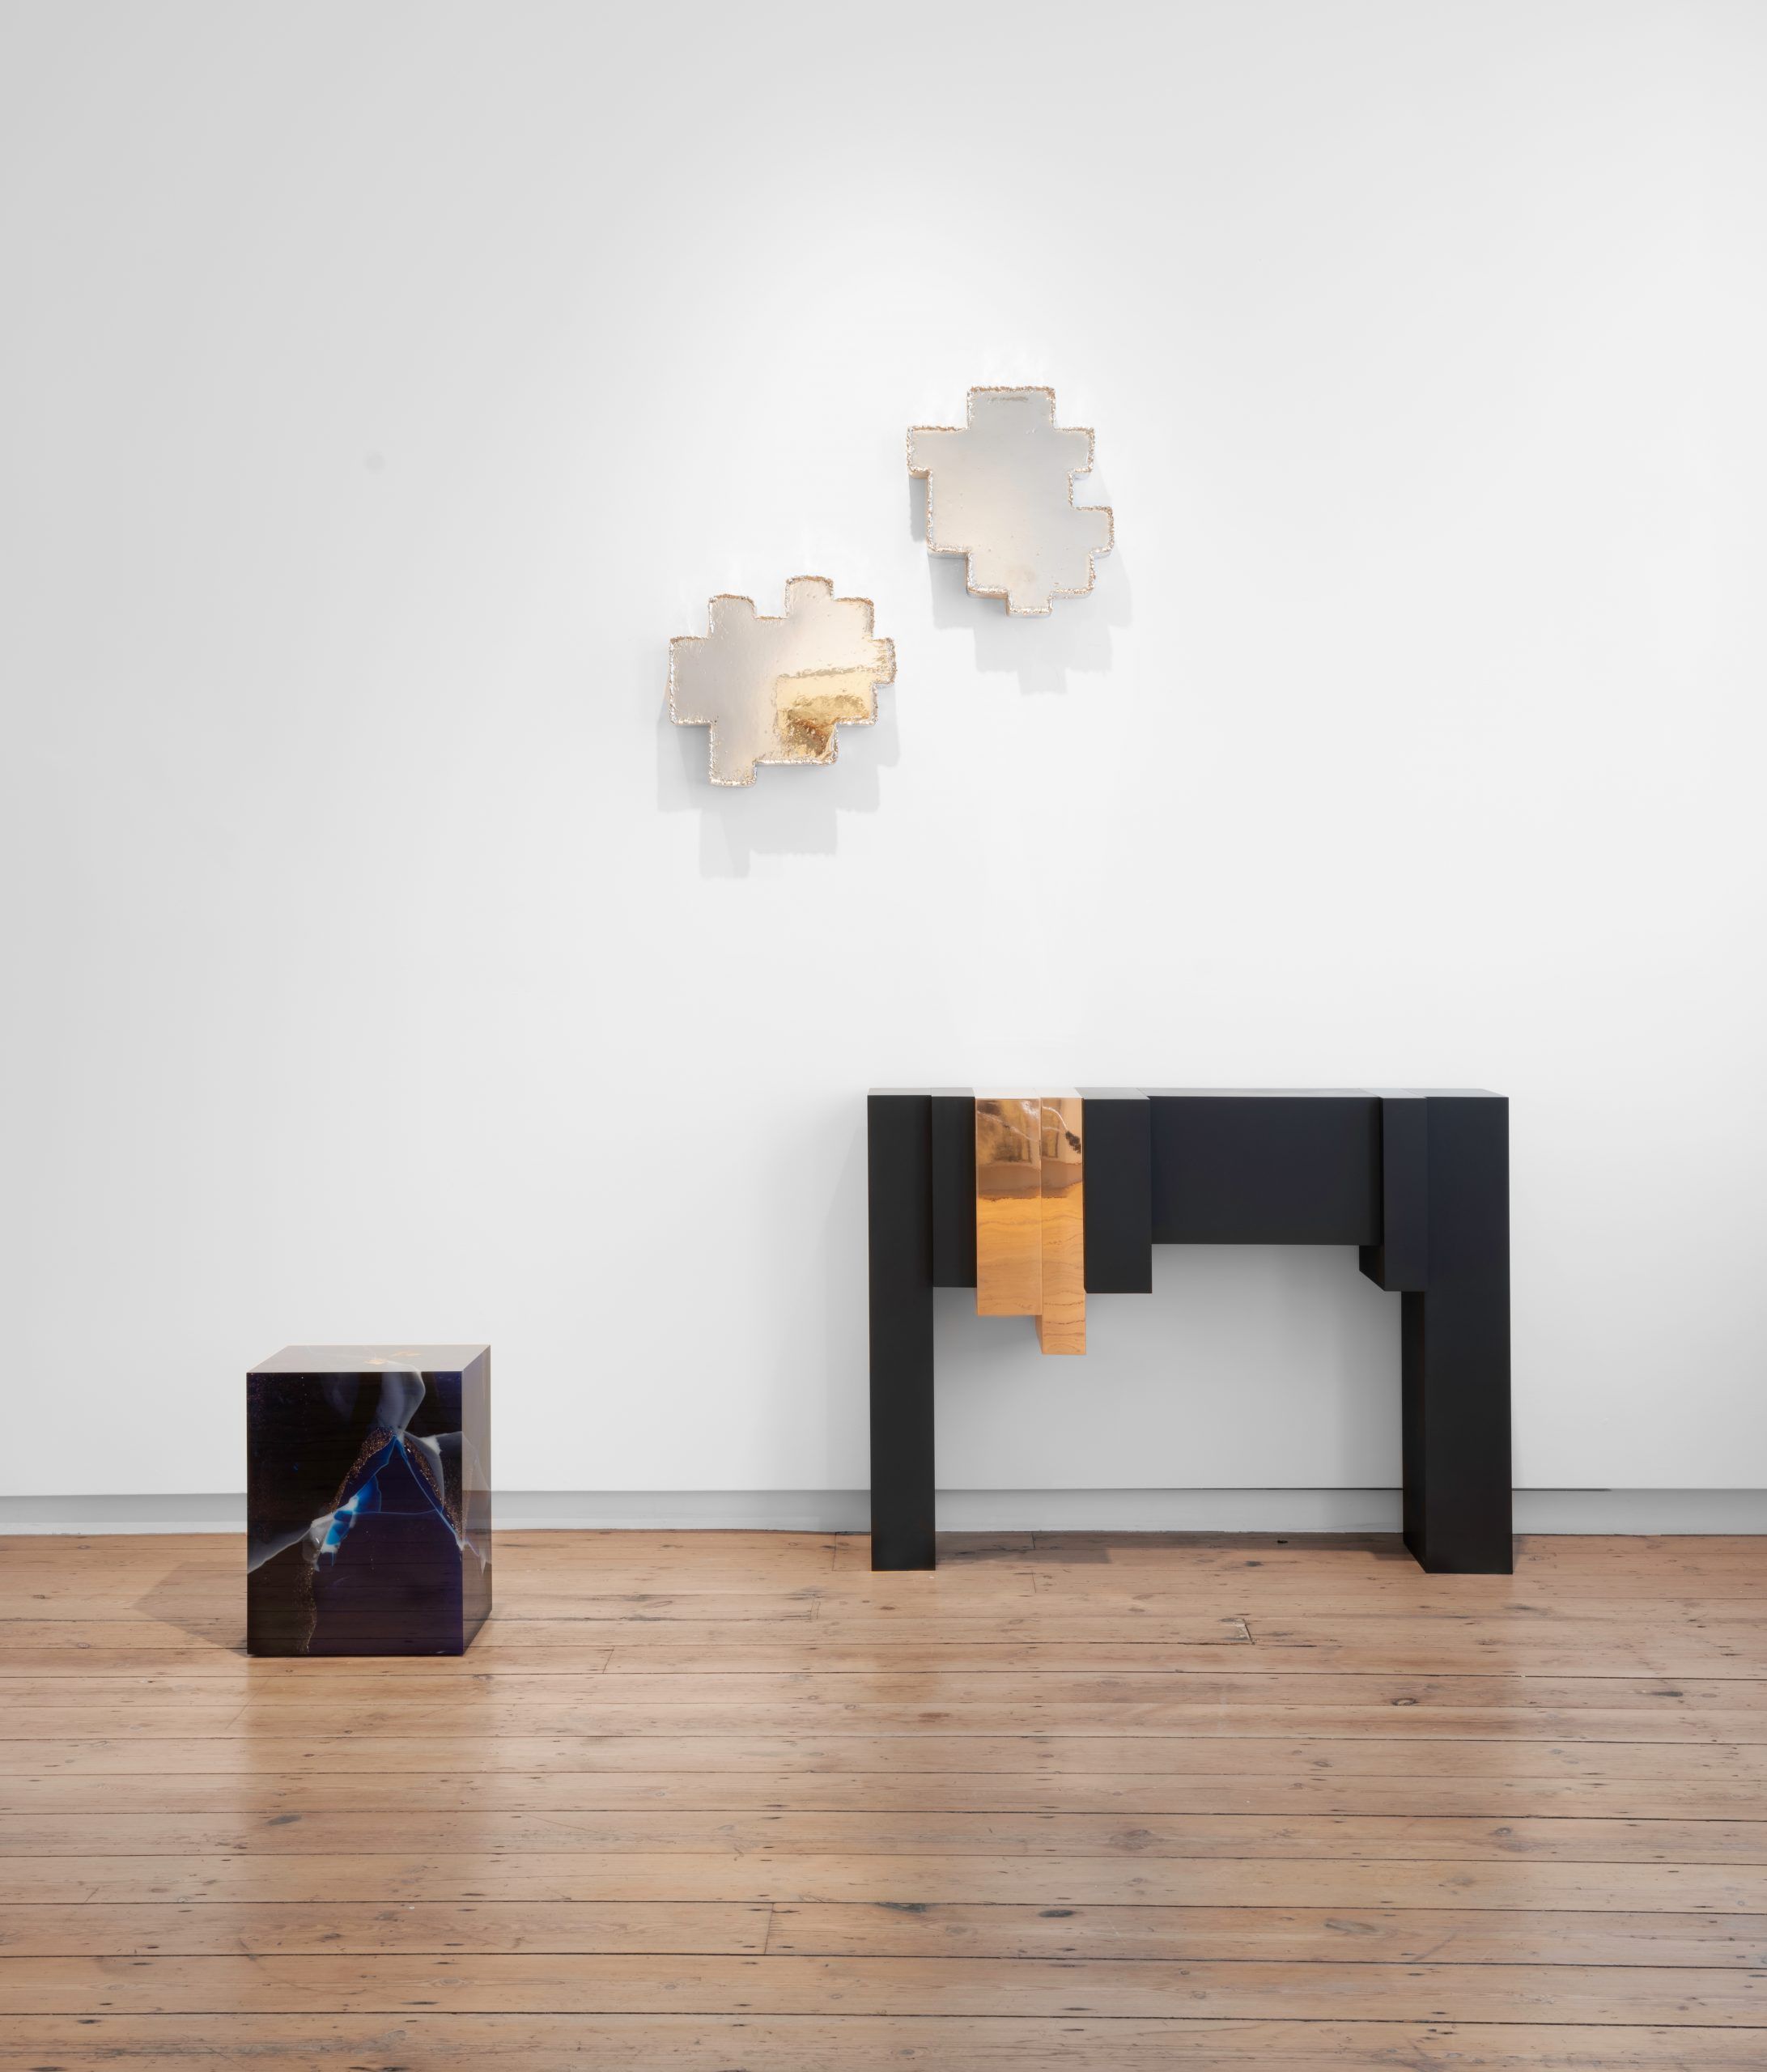 © Studio Nucleo Metal Fossil Niclel Mirrors with Bronze Age Consolle and Lapislazuli Stone Fossil courtesy ammann//projects